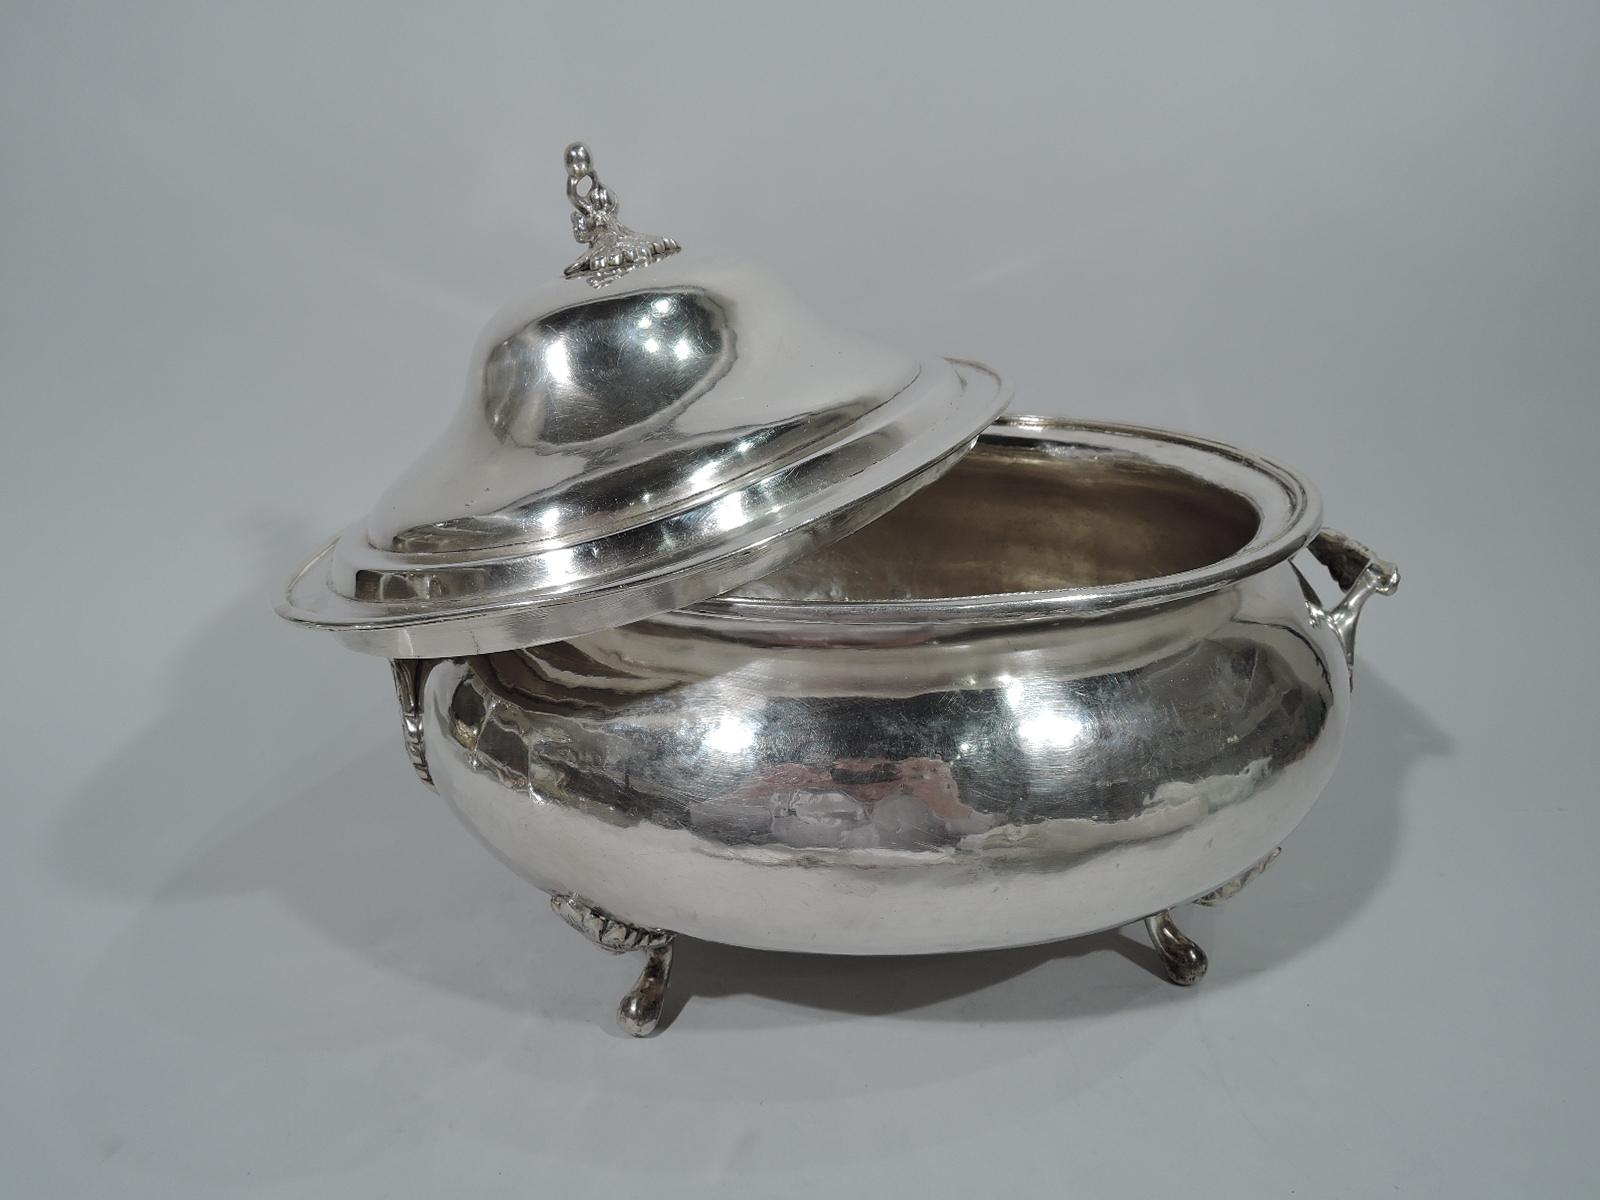 Large South American silver covered tureen, 19th century. Oval and bellied. End bracket handles leaf “wrapped” and mounted. Four leaf-mounted scroll supports. Rim interior cabled. Cover domed with ring-finial in form of drooping flower with